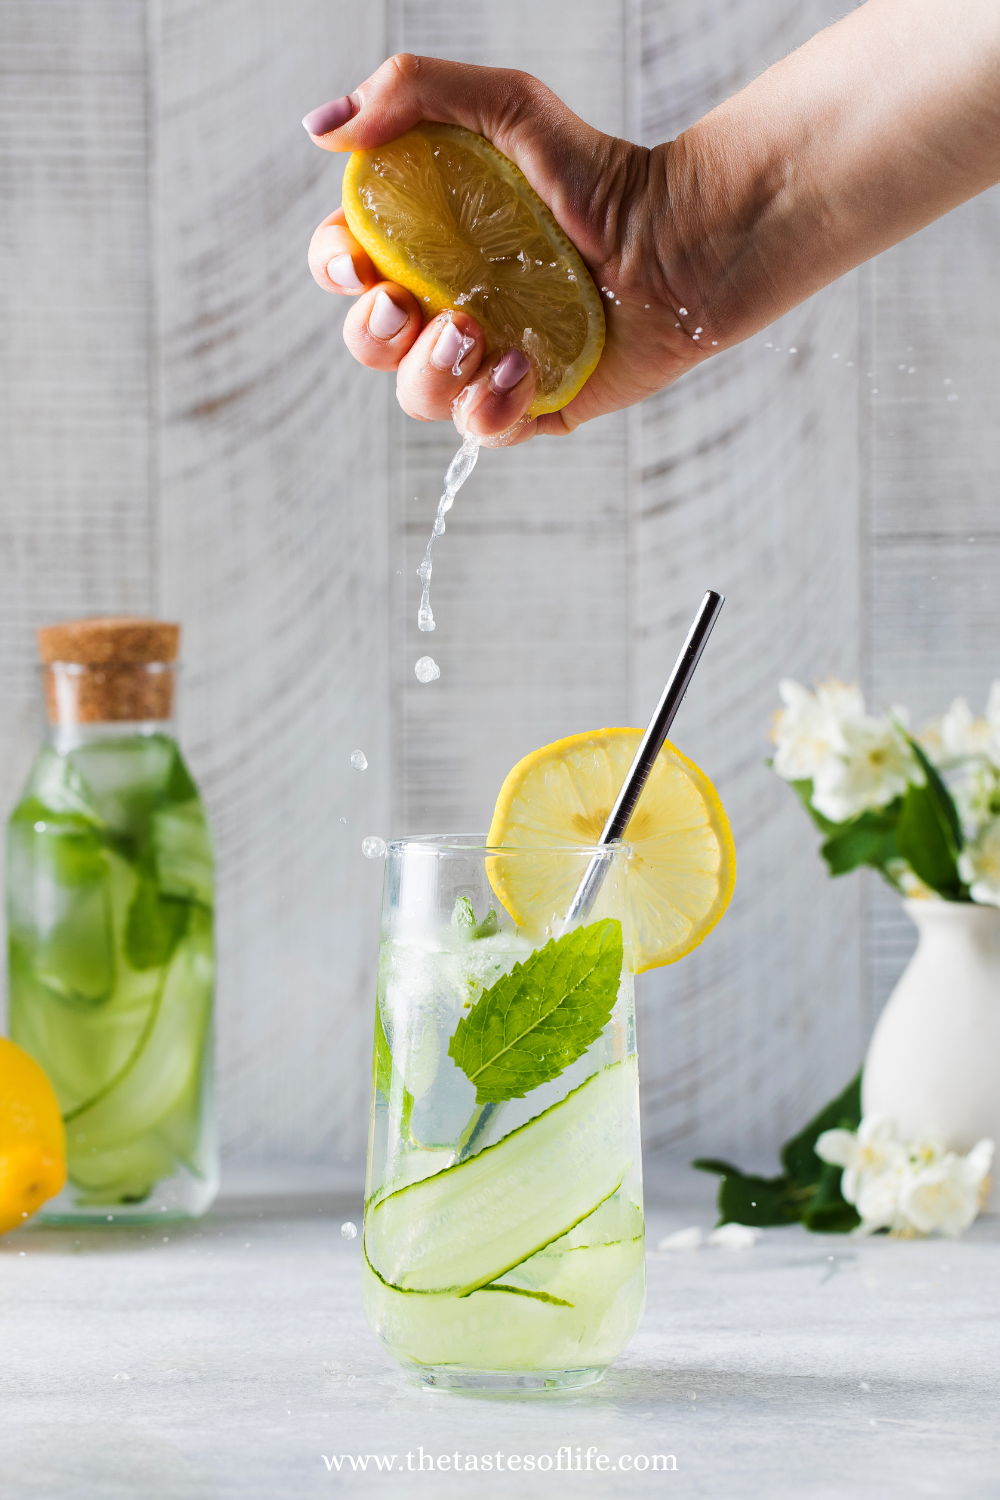 Benefits of Lemon and Cucumber Water